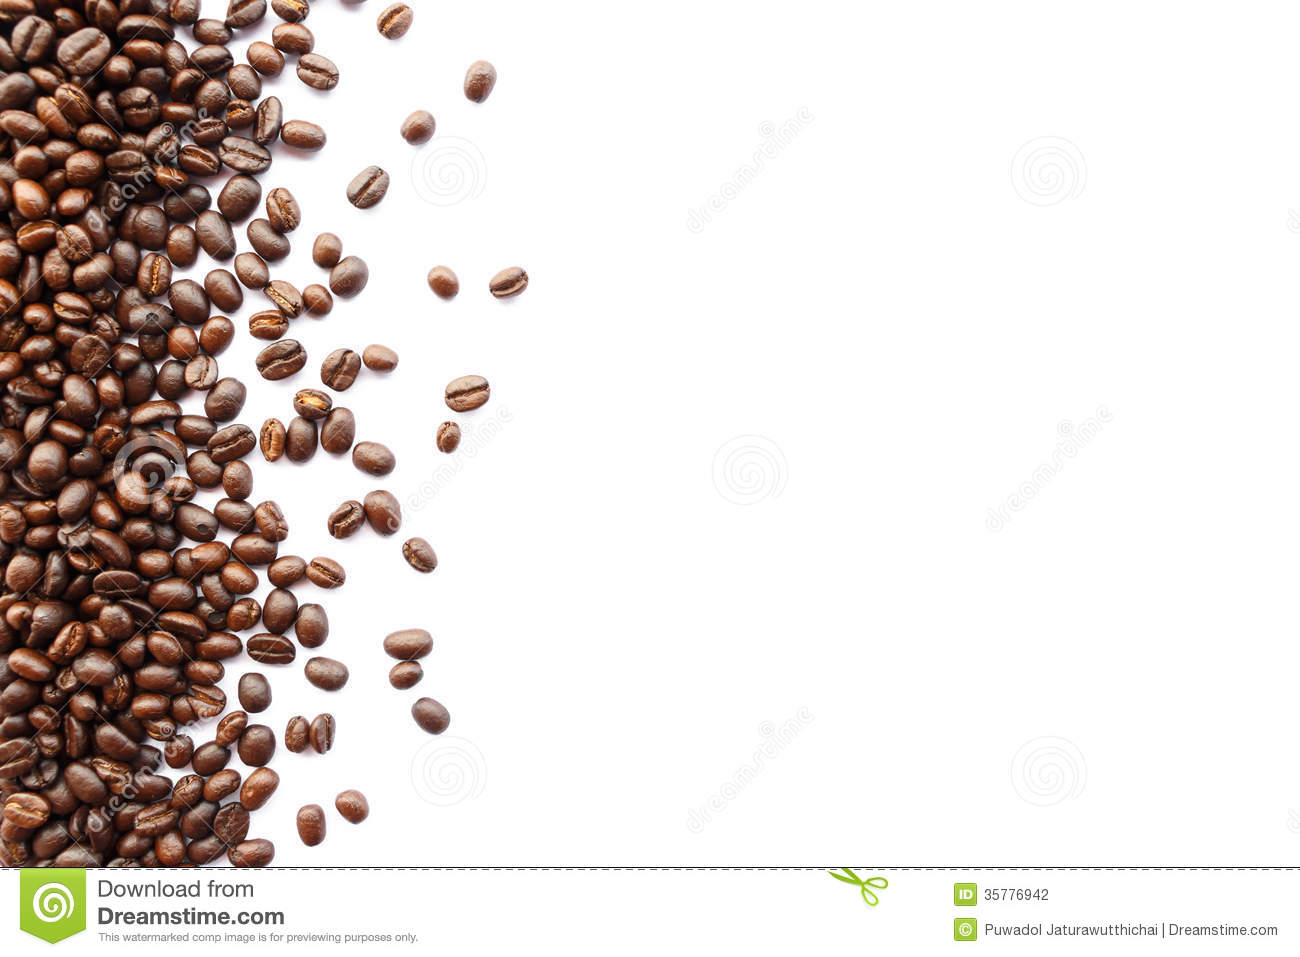 Coffee Beans At Border Of Image With Blank Area For Fill Text 